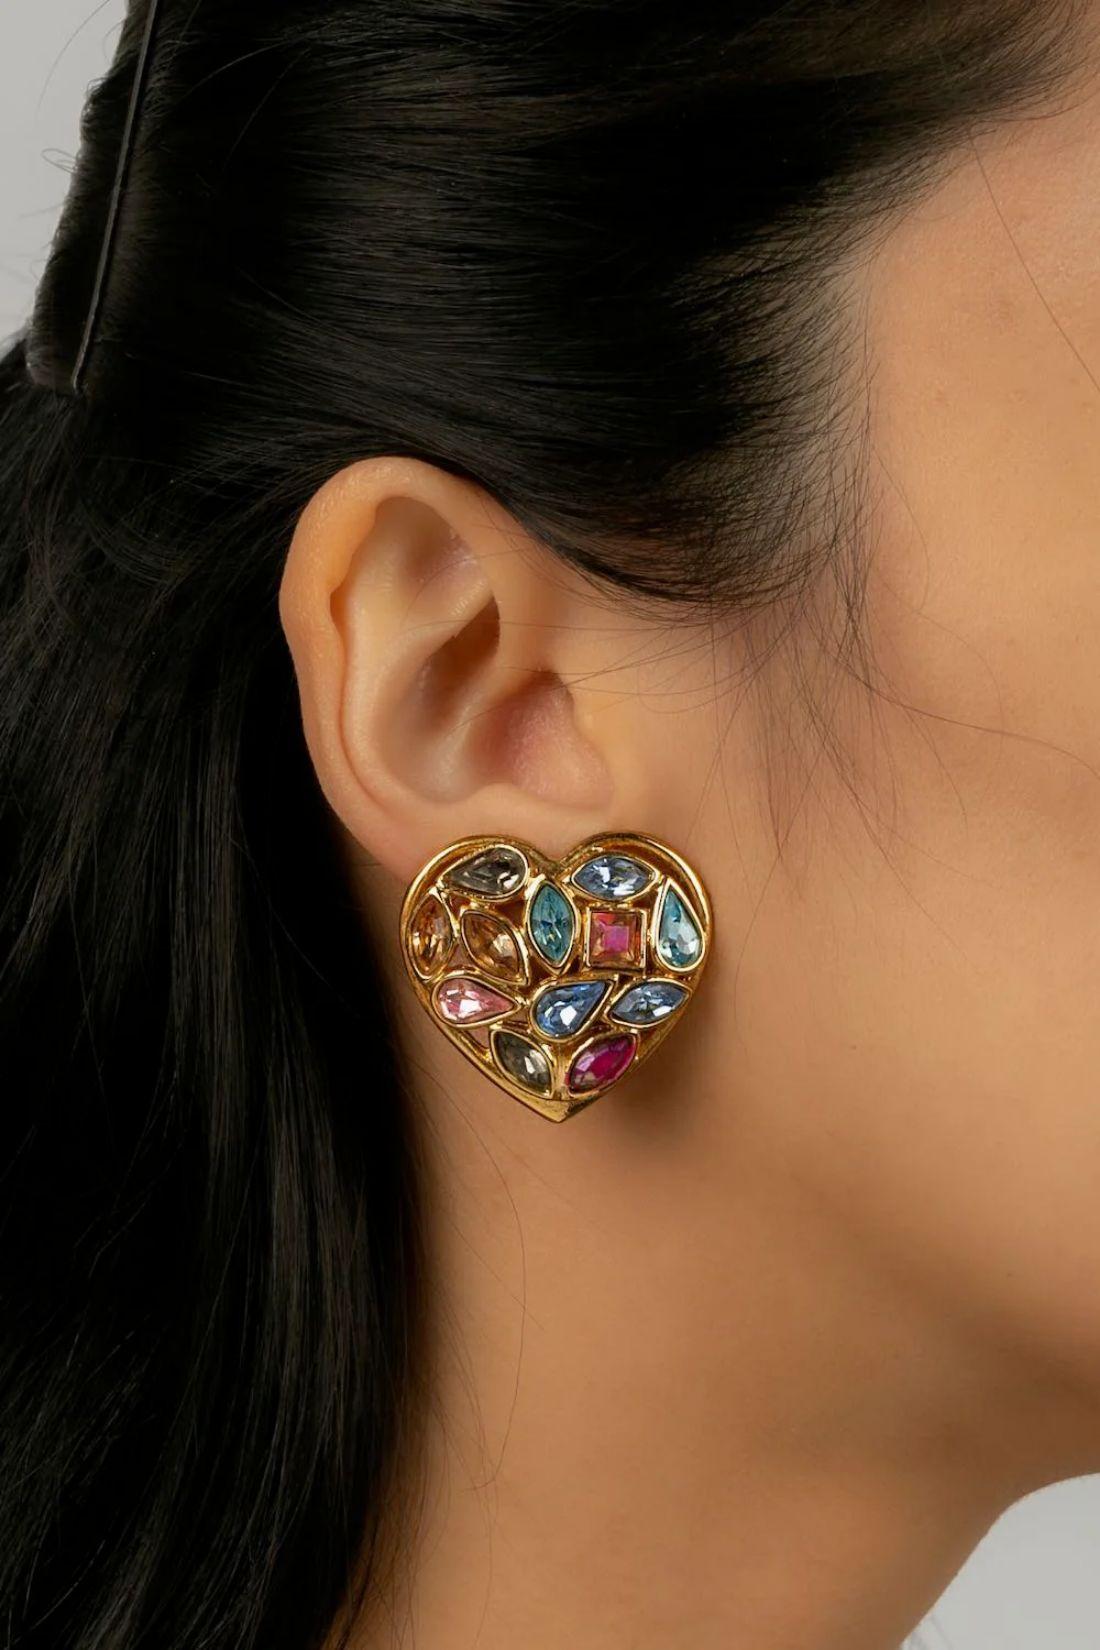 Yves Saint Laurent - (Made in France) Gold metal openwork earrings with blue and pink rhinestones.

Additional information:

Dimensions: 
3 cm

Condition: 
Very good condition

Seller Ref number: BO18